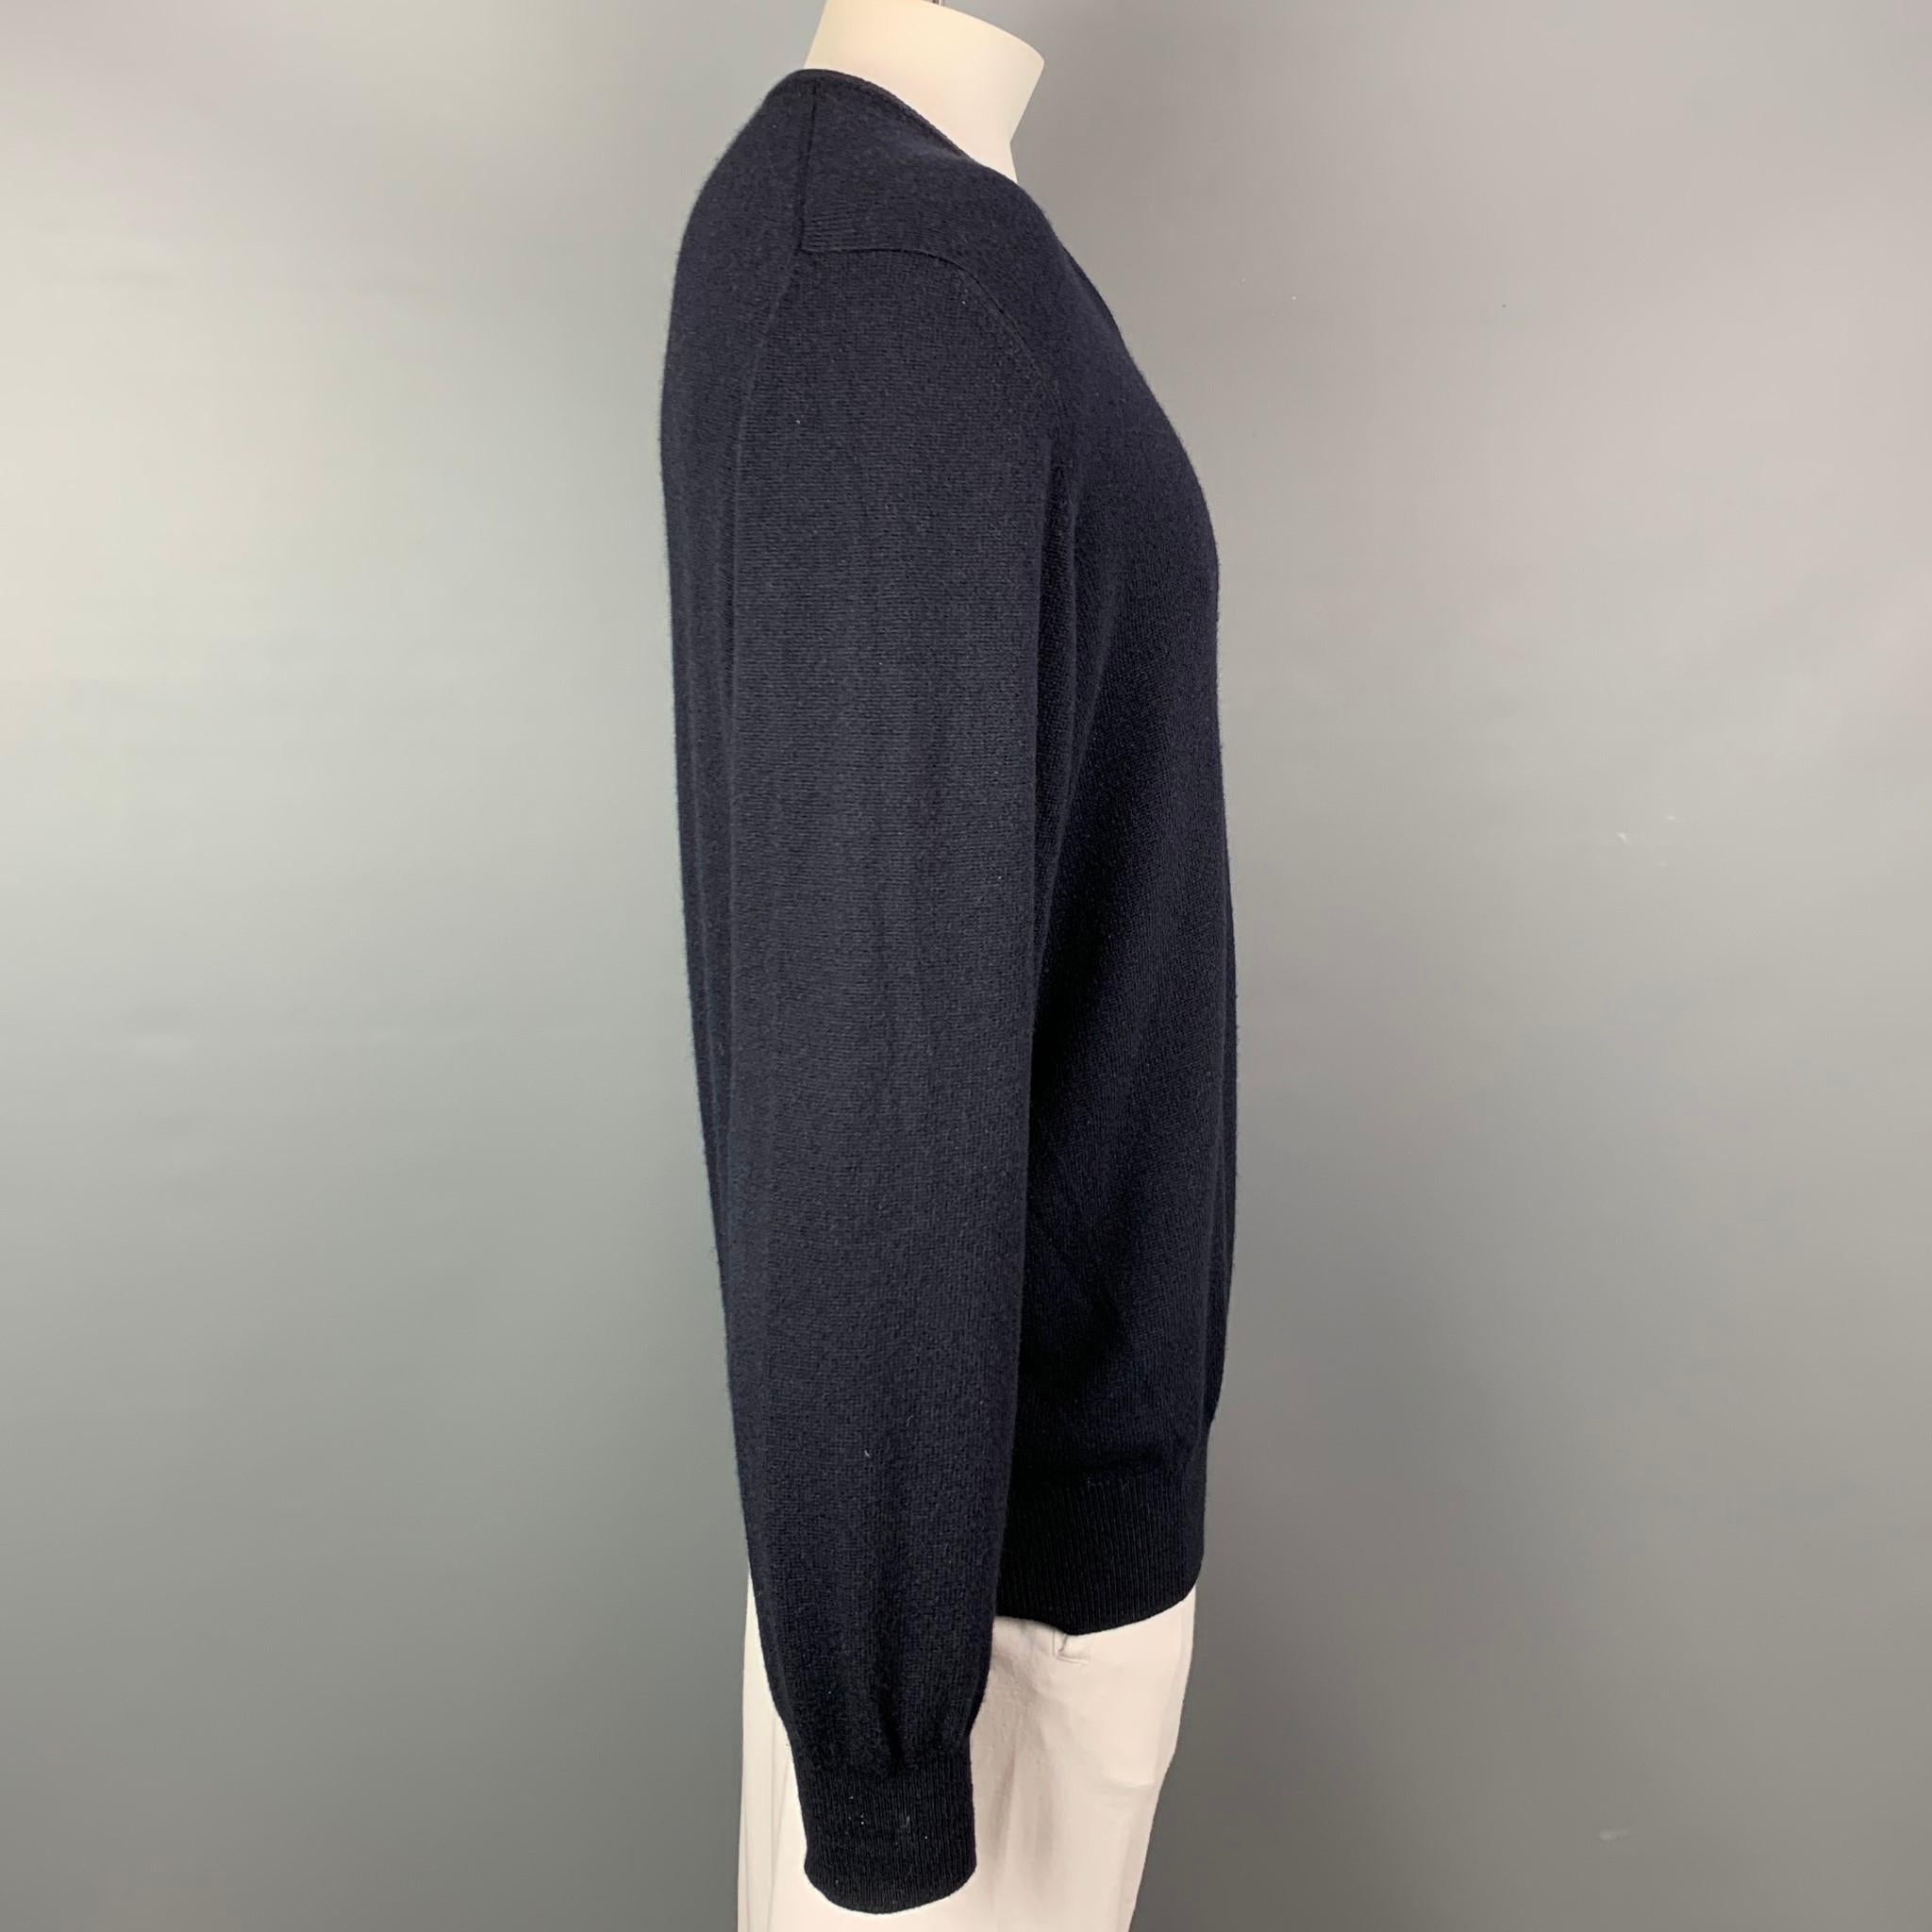 BROOKS BROTHERS sweater comes in a navy cashmere featuring a ribbed hem and a v-neck. Made in Scotland.

Very Good Pre-Owned Condition.
Marked: XL

Measurements:

Shoulder:  21 in.
Chest: 48 in.
Sleeve: 29 in.
Length: 29.5 in. 